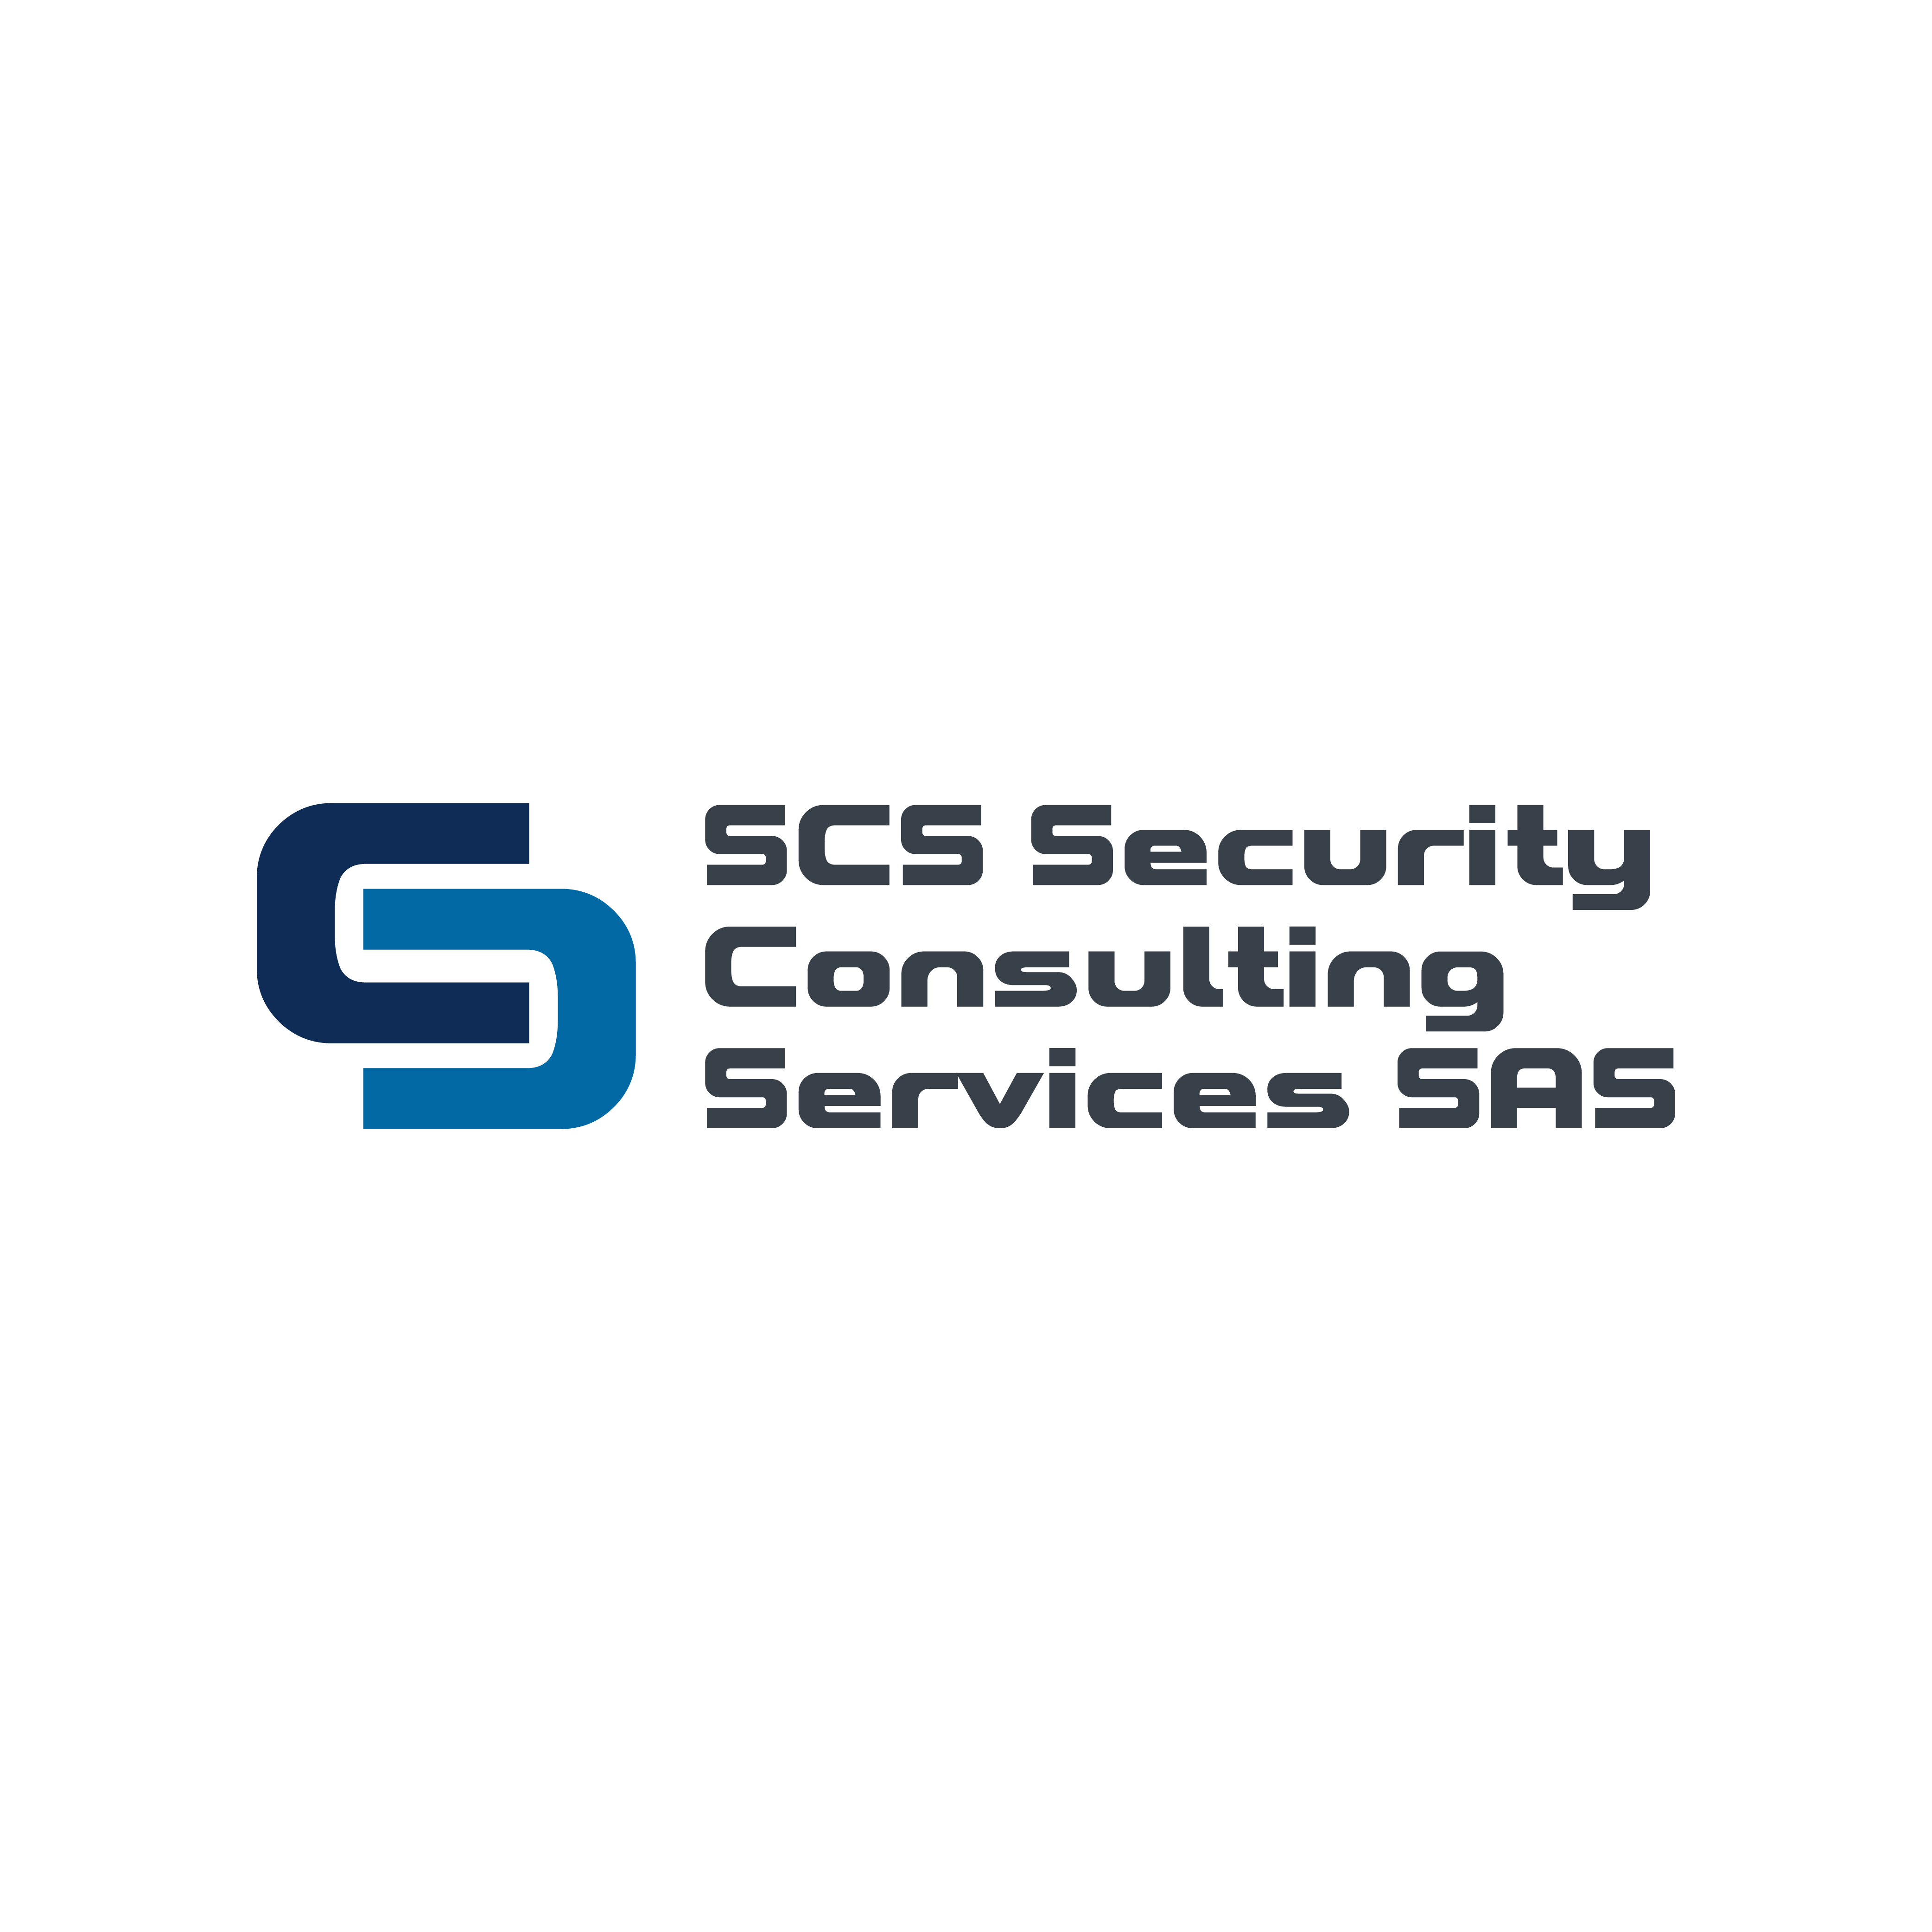 SCS Security Consulting Services SAS